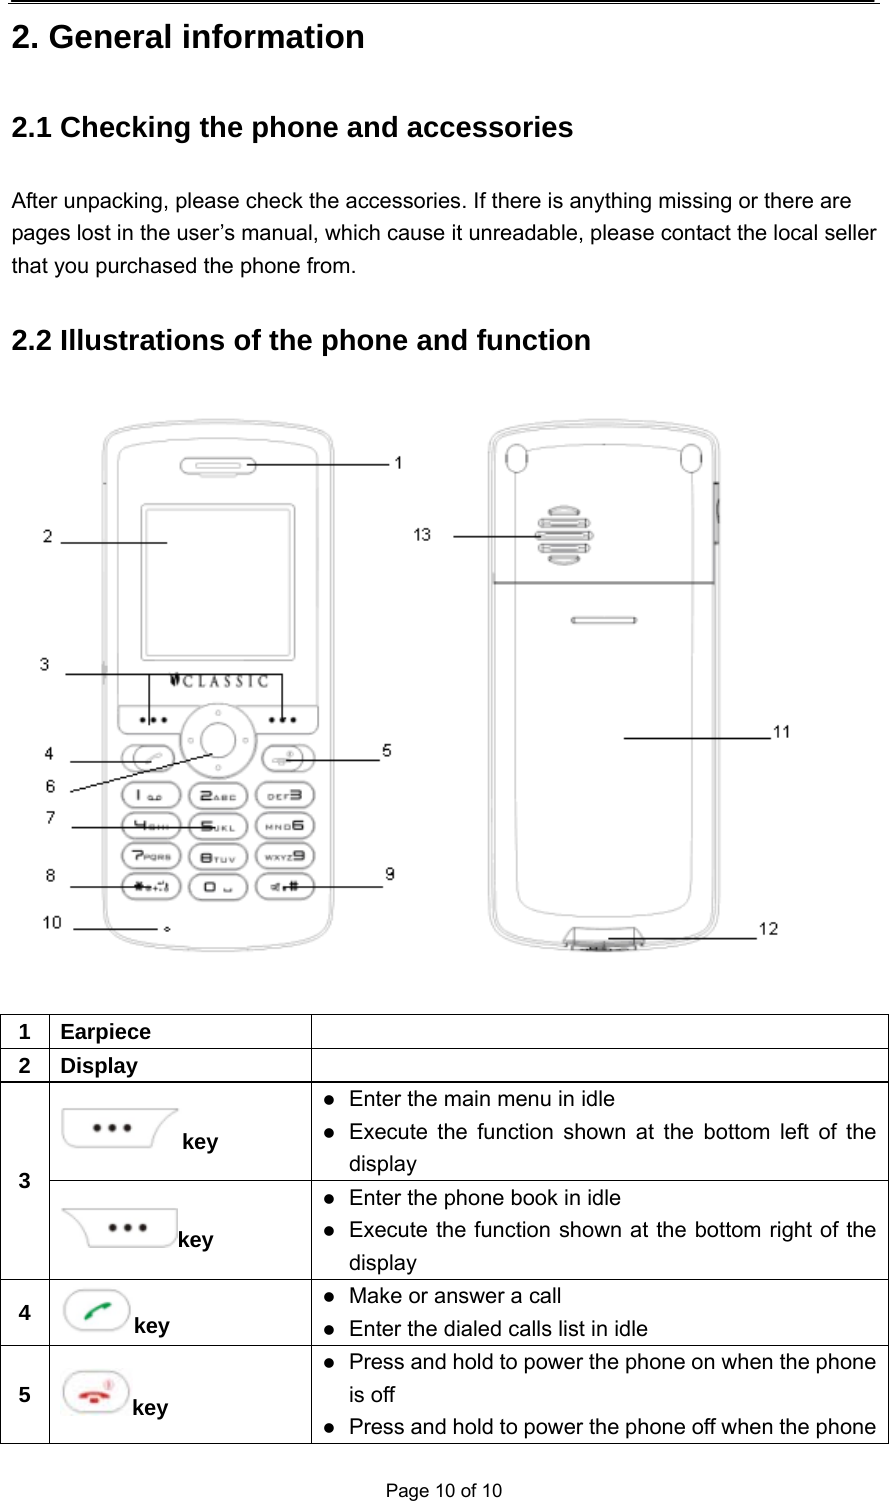  Page 10 of 10 2. General information 2.1 Checking the phone and accessories After unpacking, please check the accessories. If there is anything missing or there are pages lost in the user’s manual, which cause it unreadable, please contact the local seller that you purchased the phone from. 2.2 Illustrations of the phone and function   1  Earpiece   2  Display   key  Enter the main menu in idle  Execute the function shown at the bottom left of the display 3 key  Enter the phone book in idle  Execute the function shown at the bottom right of the display 4  key  Make or answer a call  Enter the dialed calls list in idle 5  key  Press and hold to power the phone on when the phone is off  Press and hold to power the phone off when the phone 